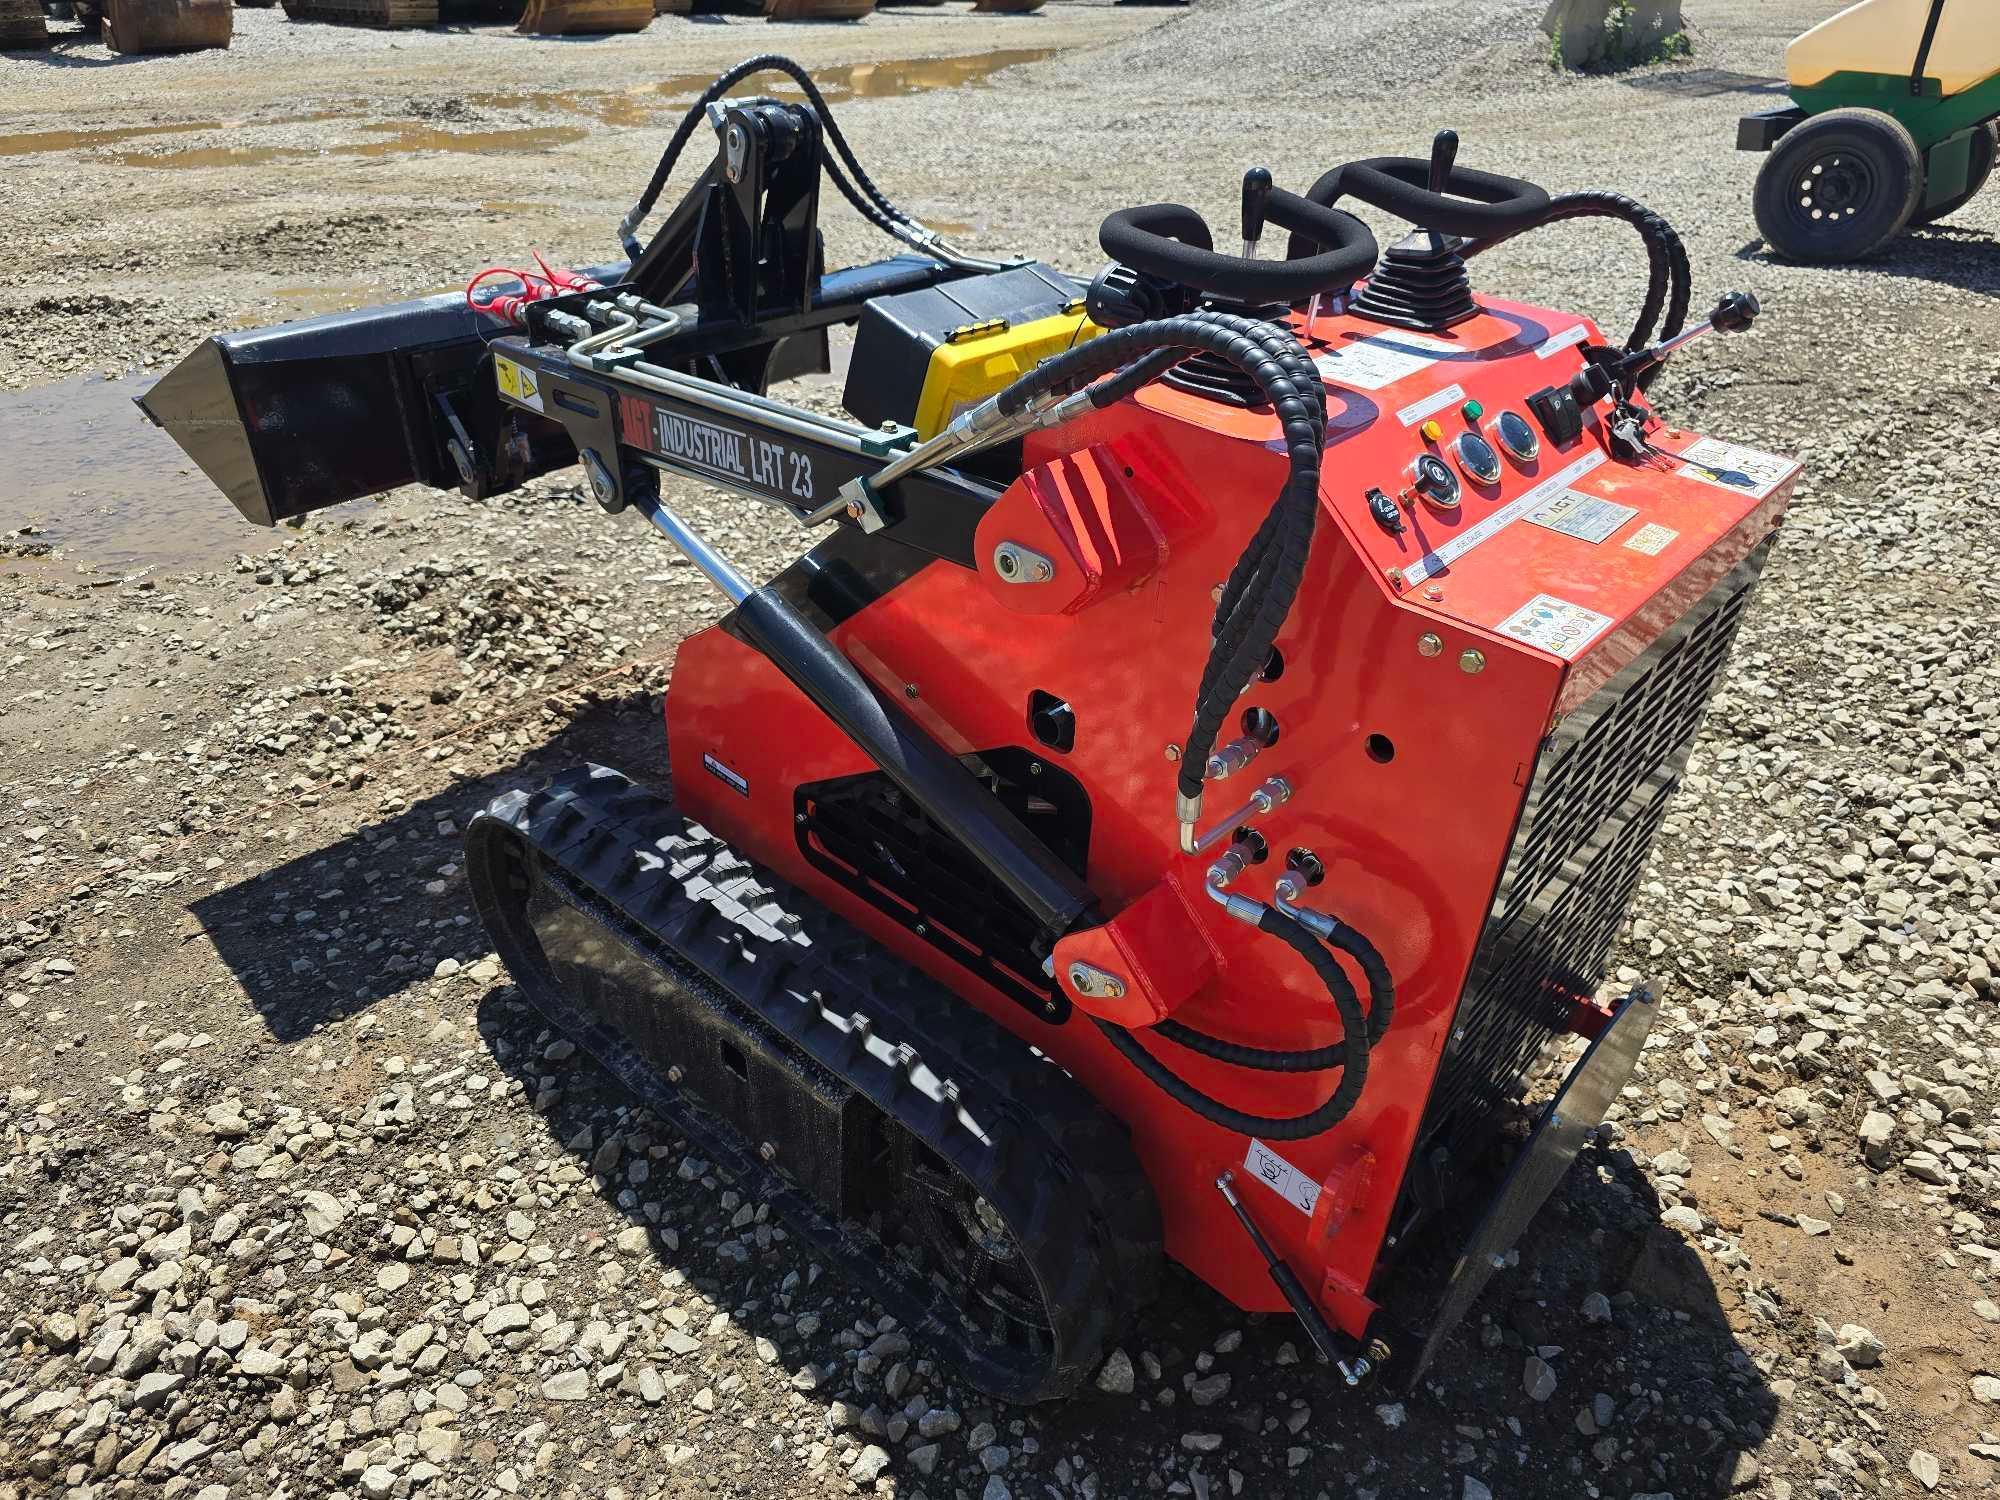 NEW AGT LRT23 MINI TRACK LOADER SN 2036429 powered by Briggs & Stratton gas engine, 23HP, rubber